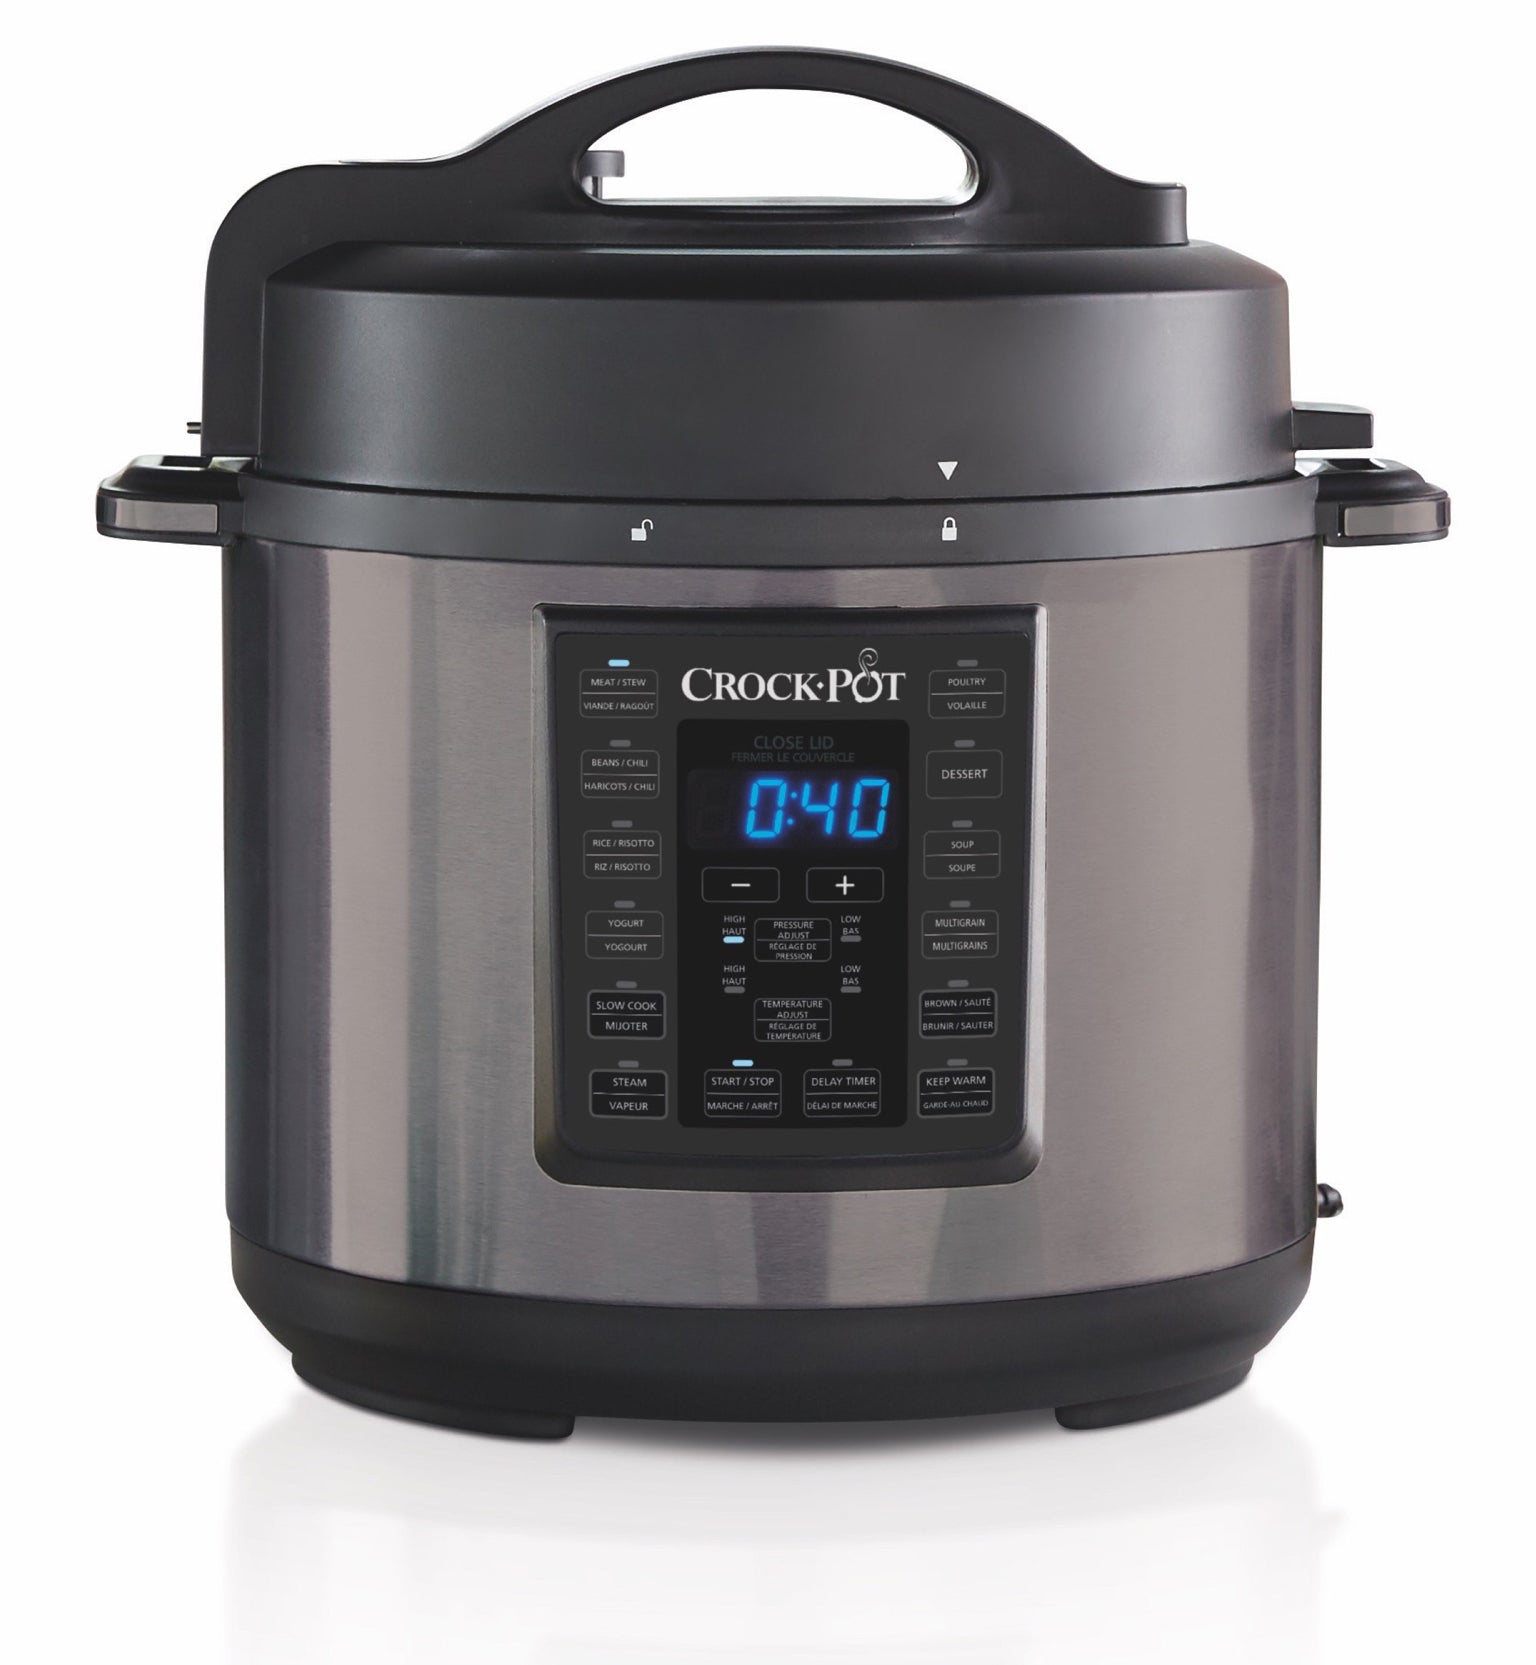 Crockpot Express Accessories - Simple and Seasonal